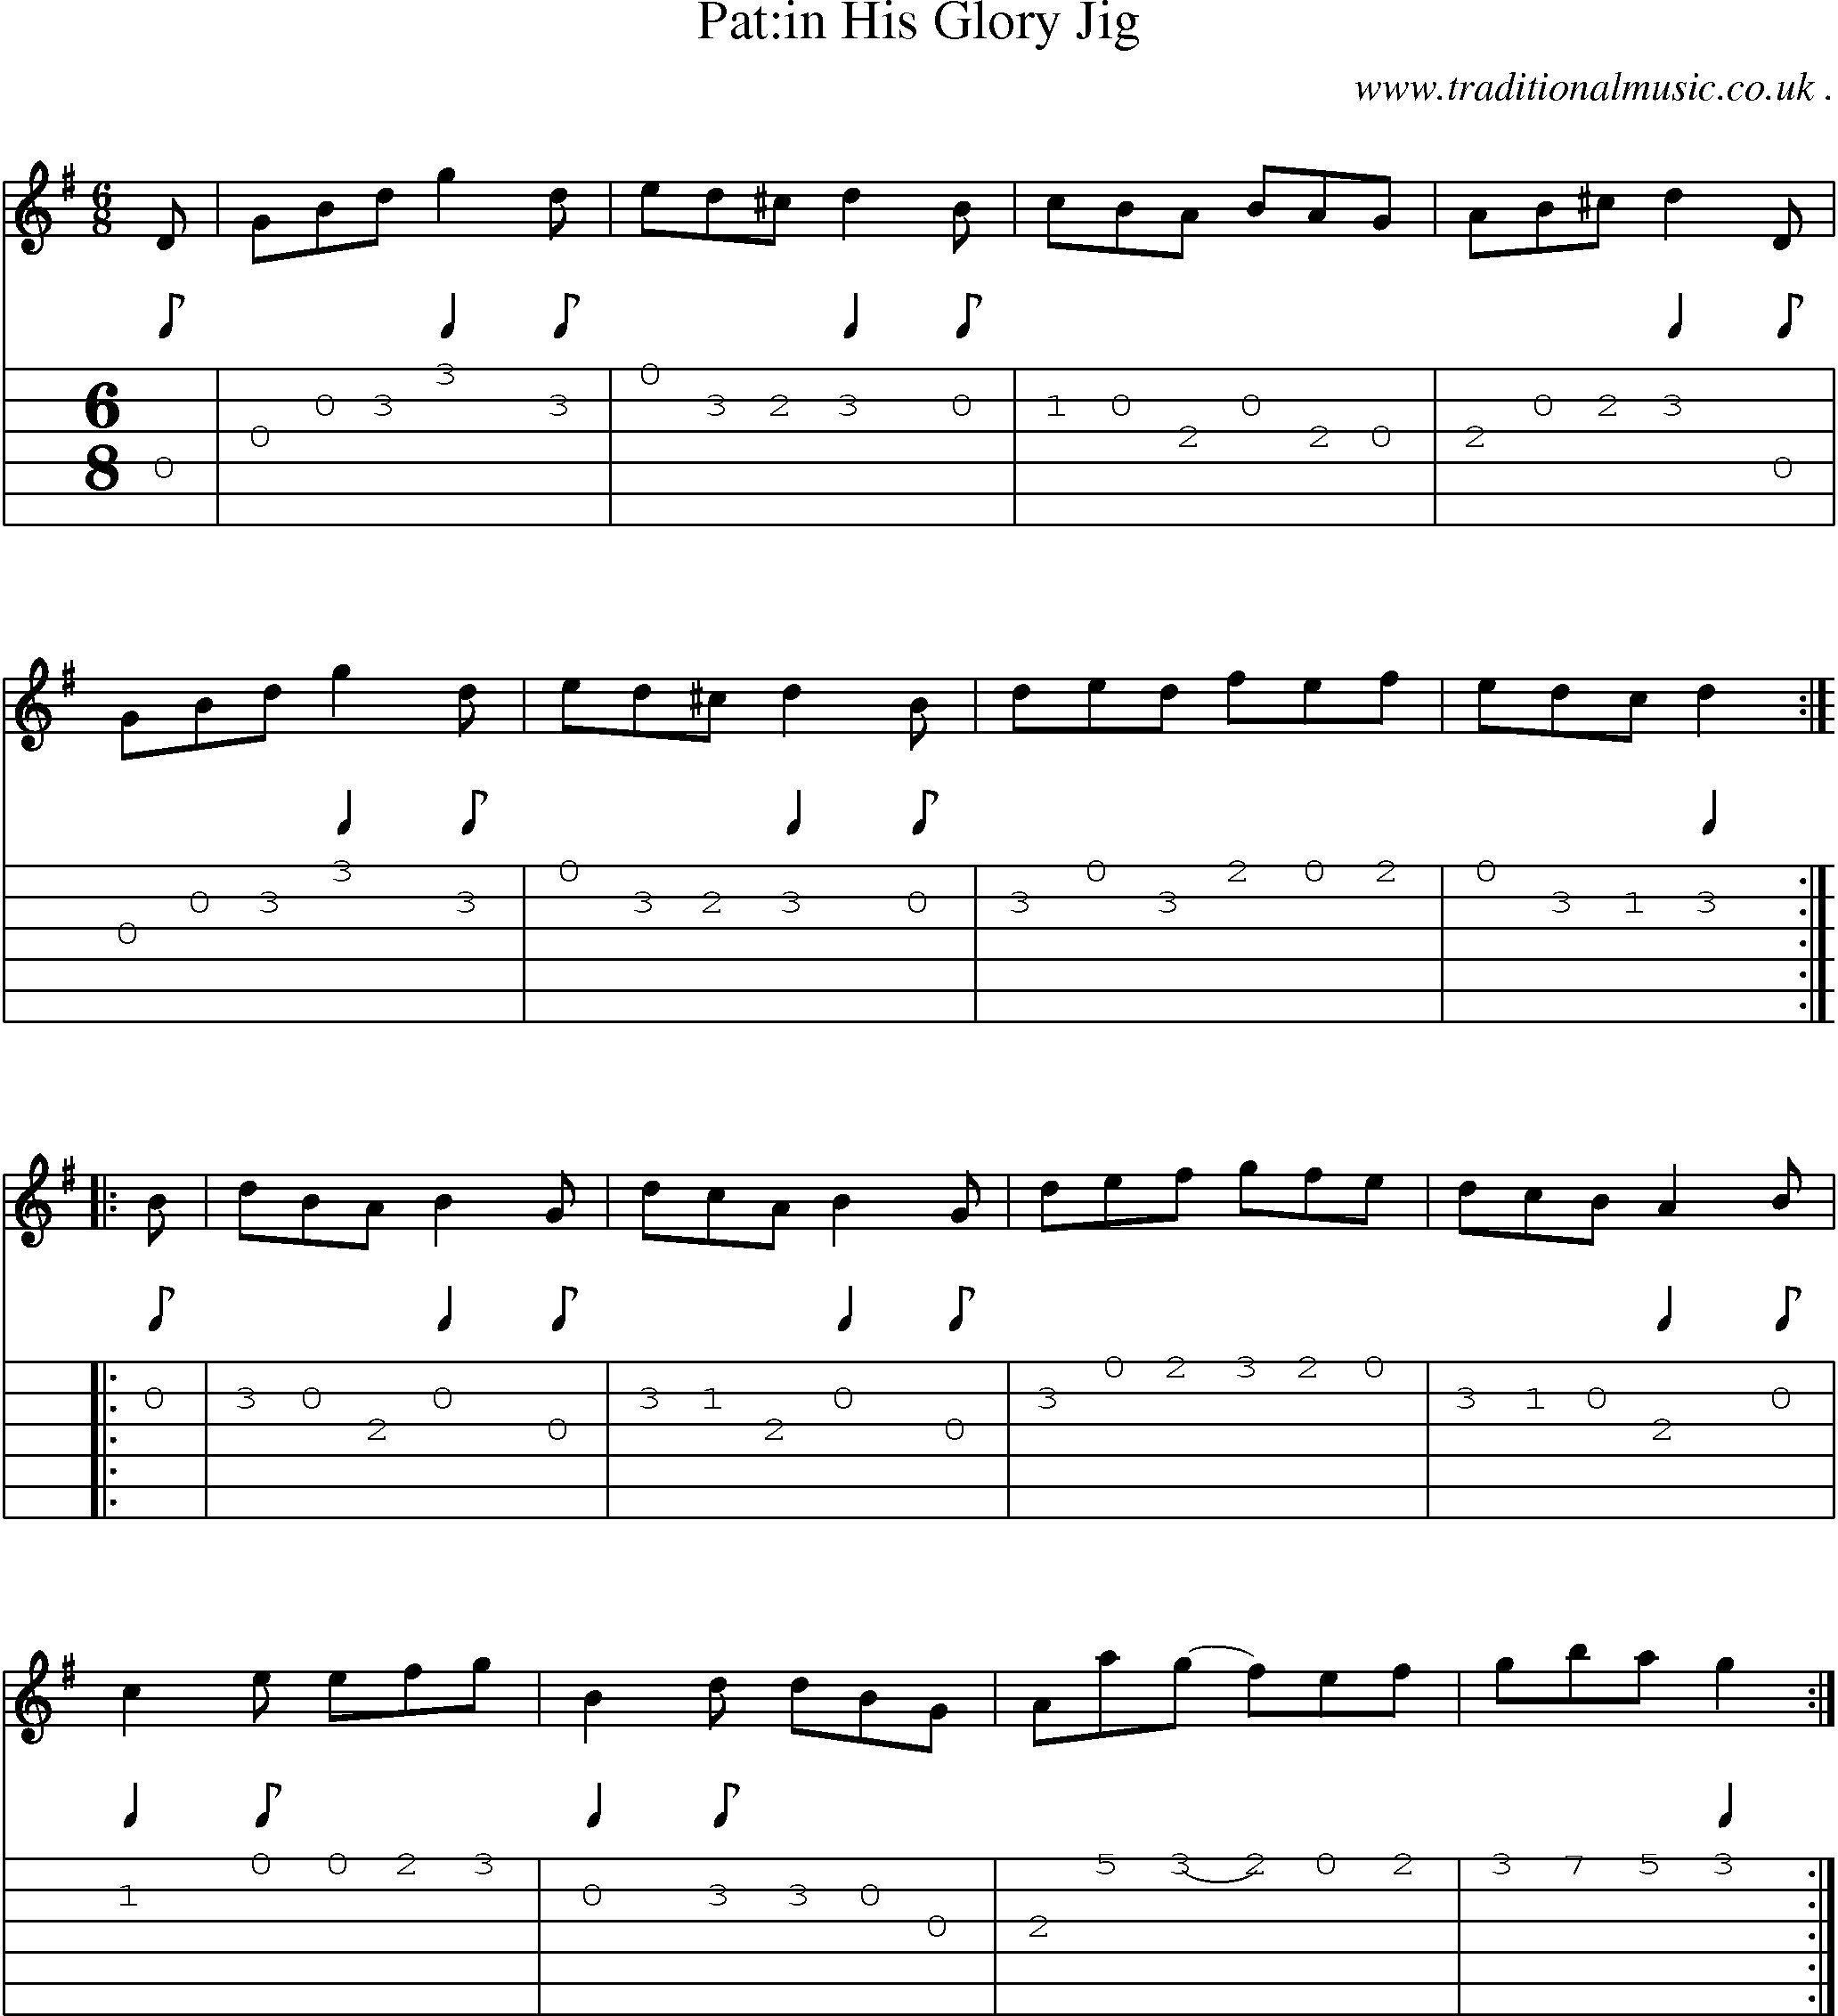 Sheet-Music and Guitar Tabs for Patin His Glory Jig